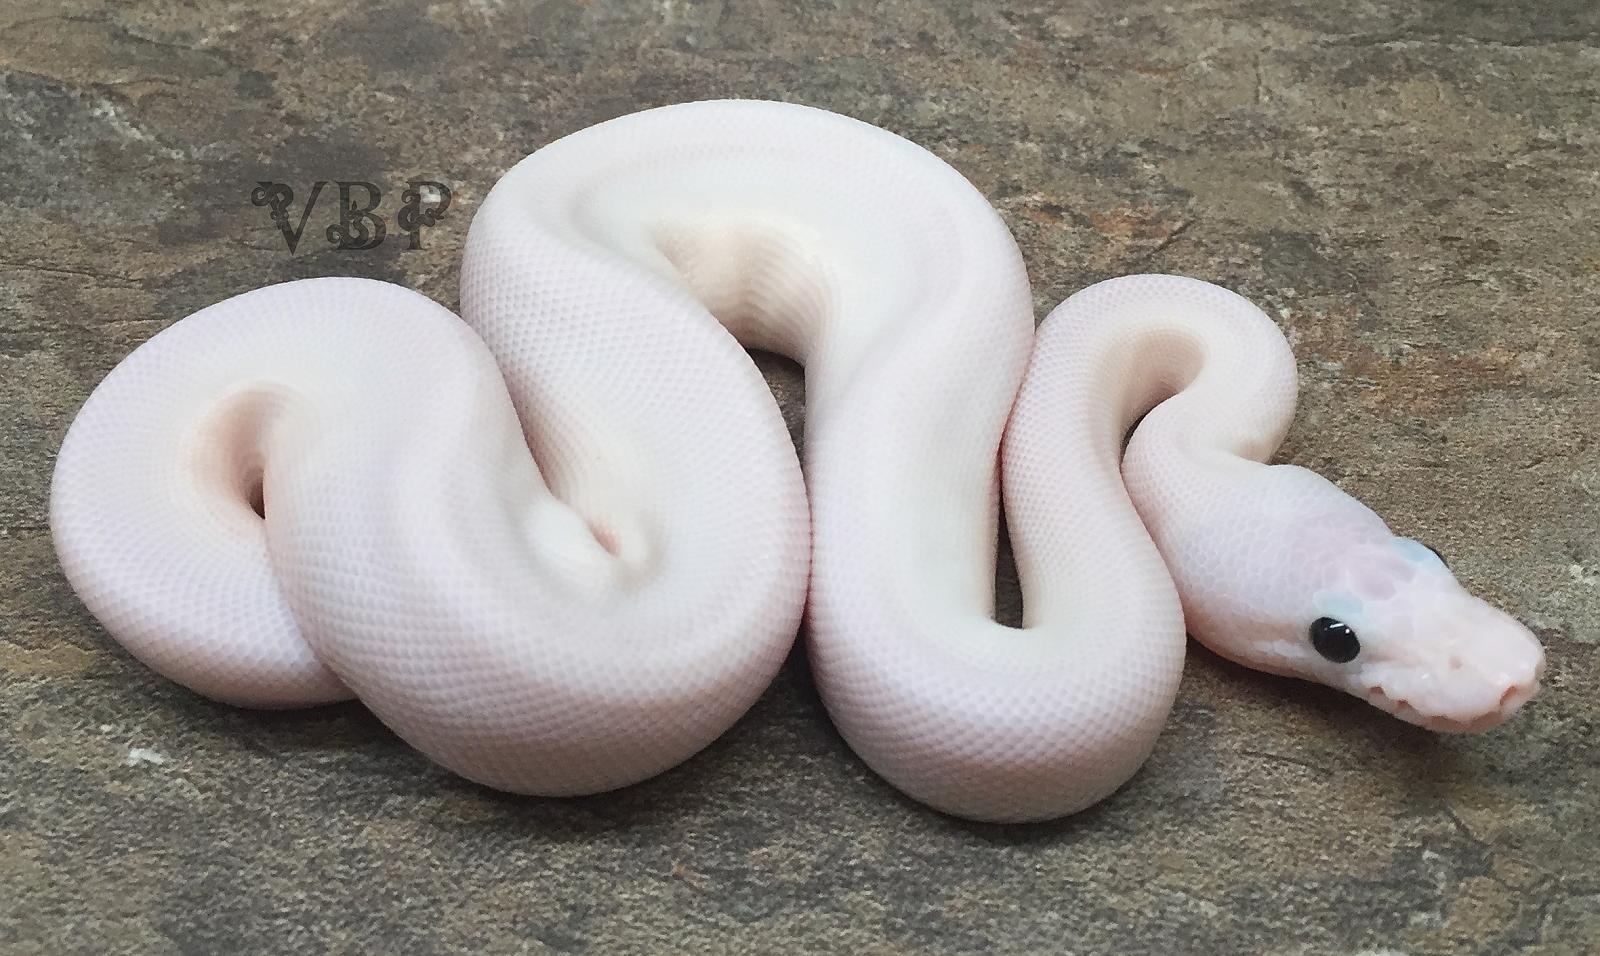 This is my new baby spider pied 'white wedding' female.